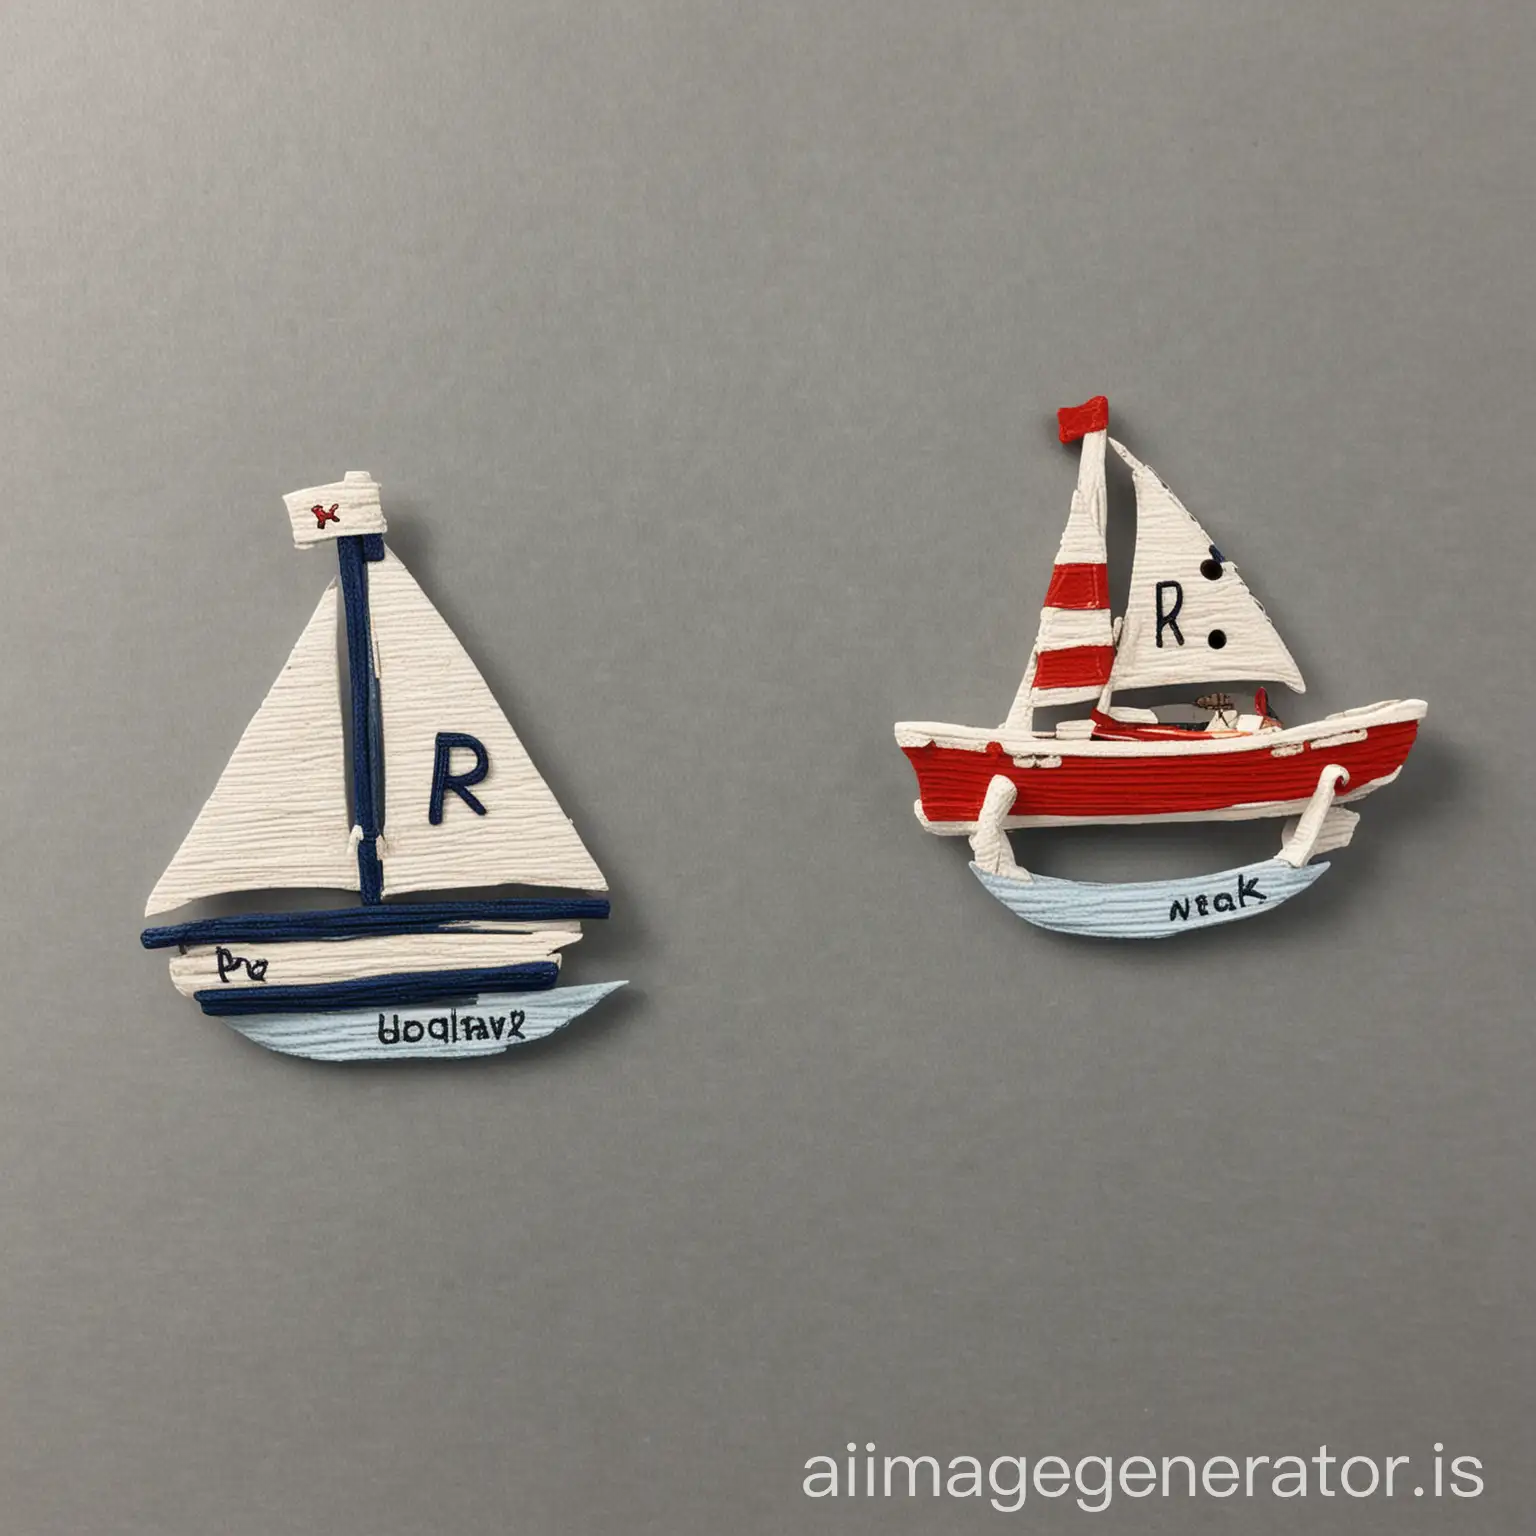 English letters RDK and sailboat